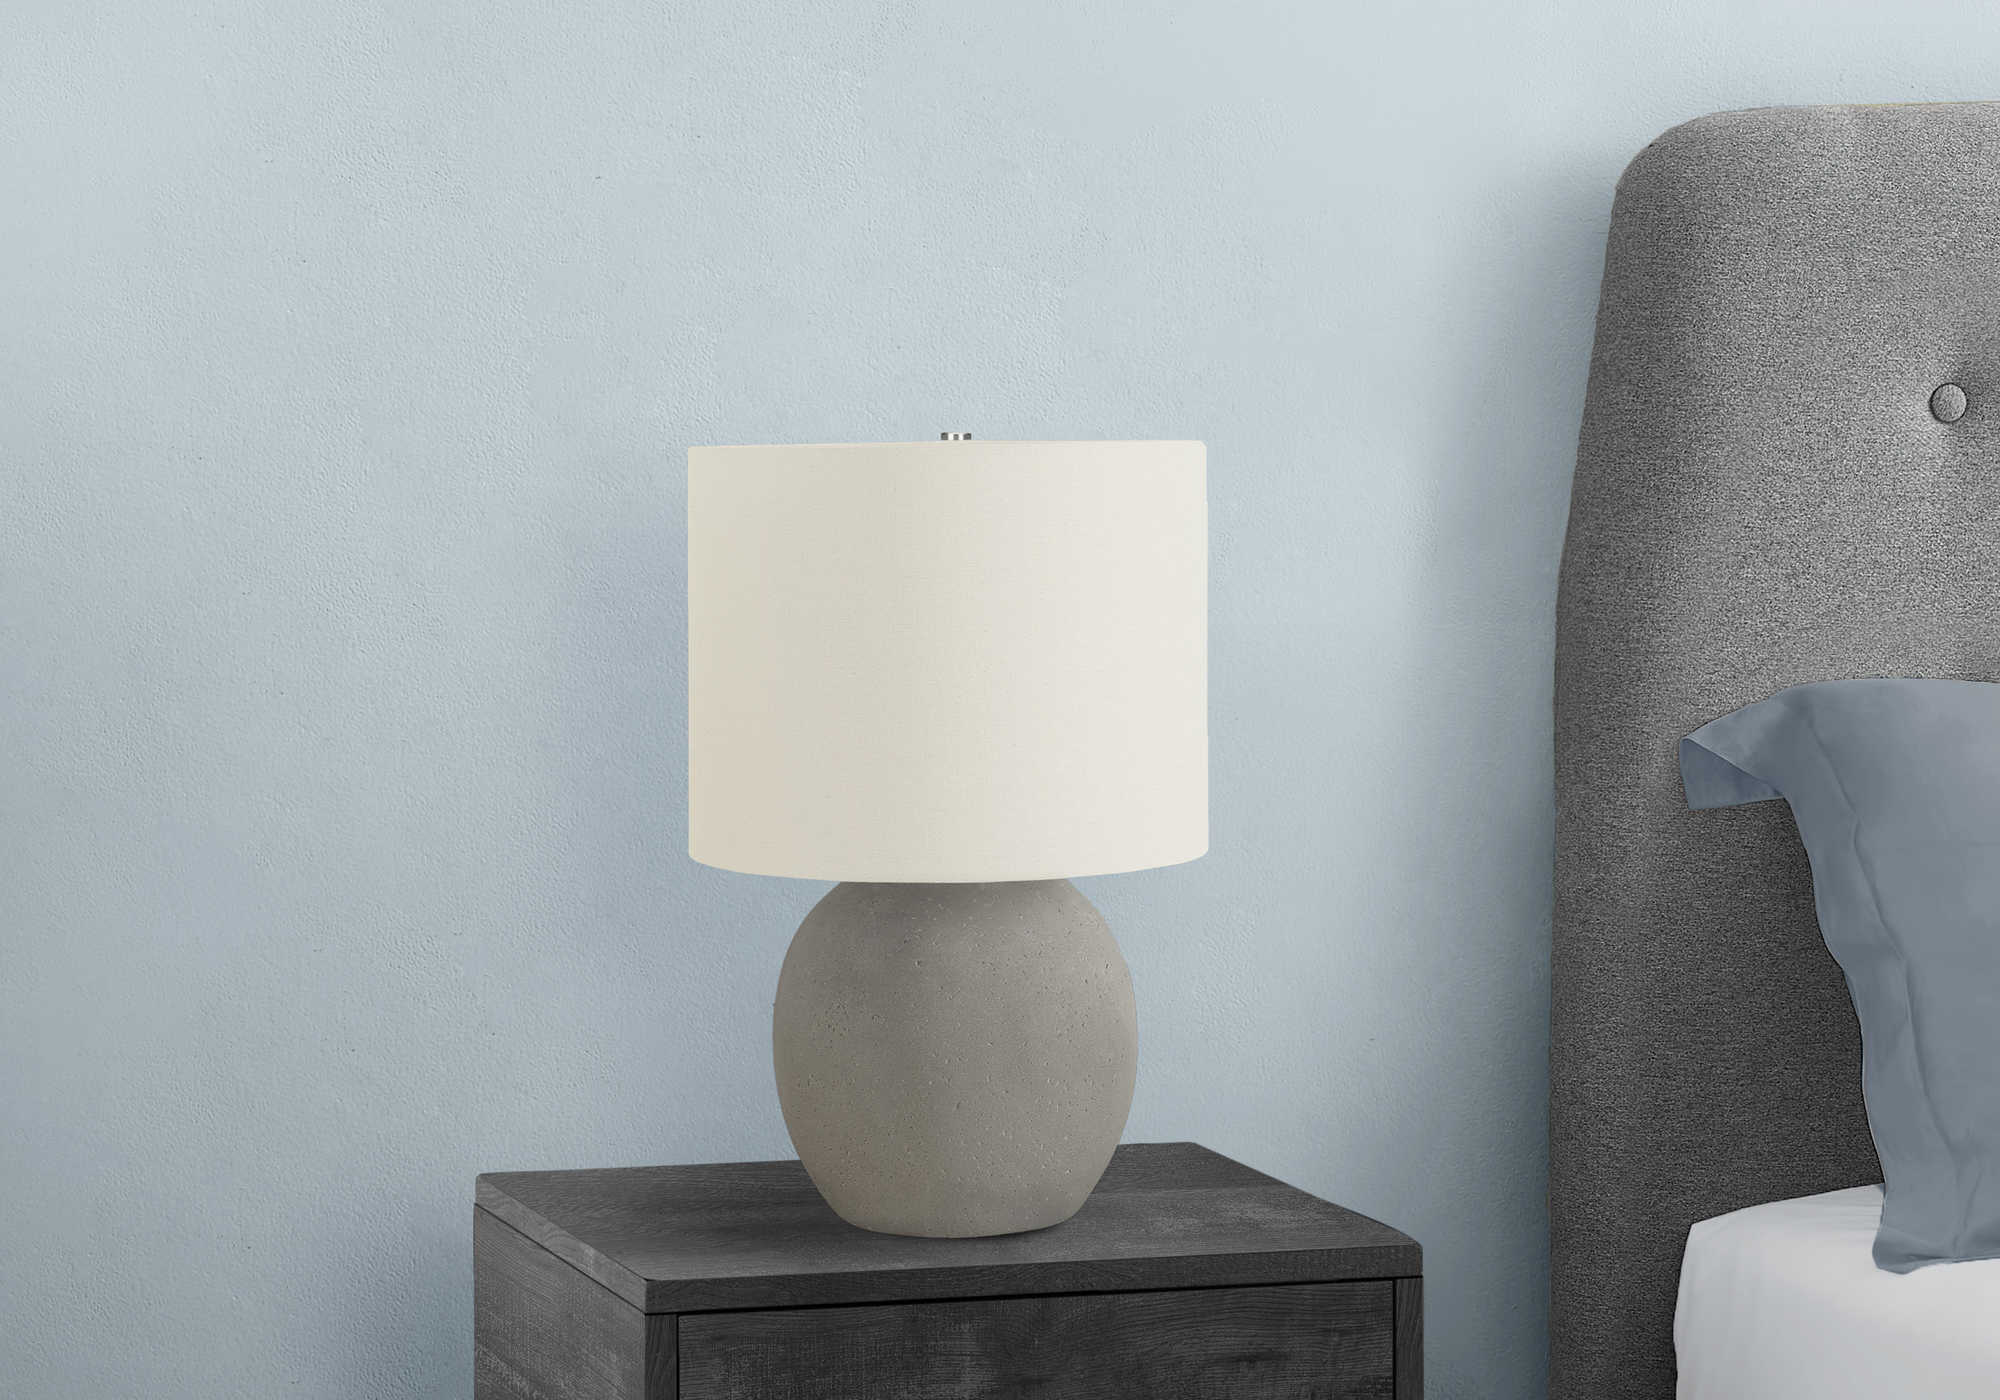 LIGHTING - 20"H TABLE LAMP GREY CONCRETE / IVORY SHADE